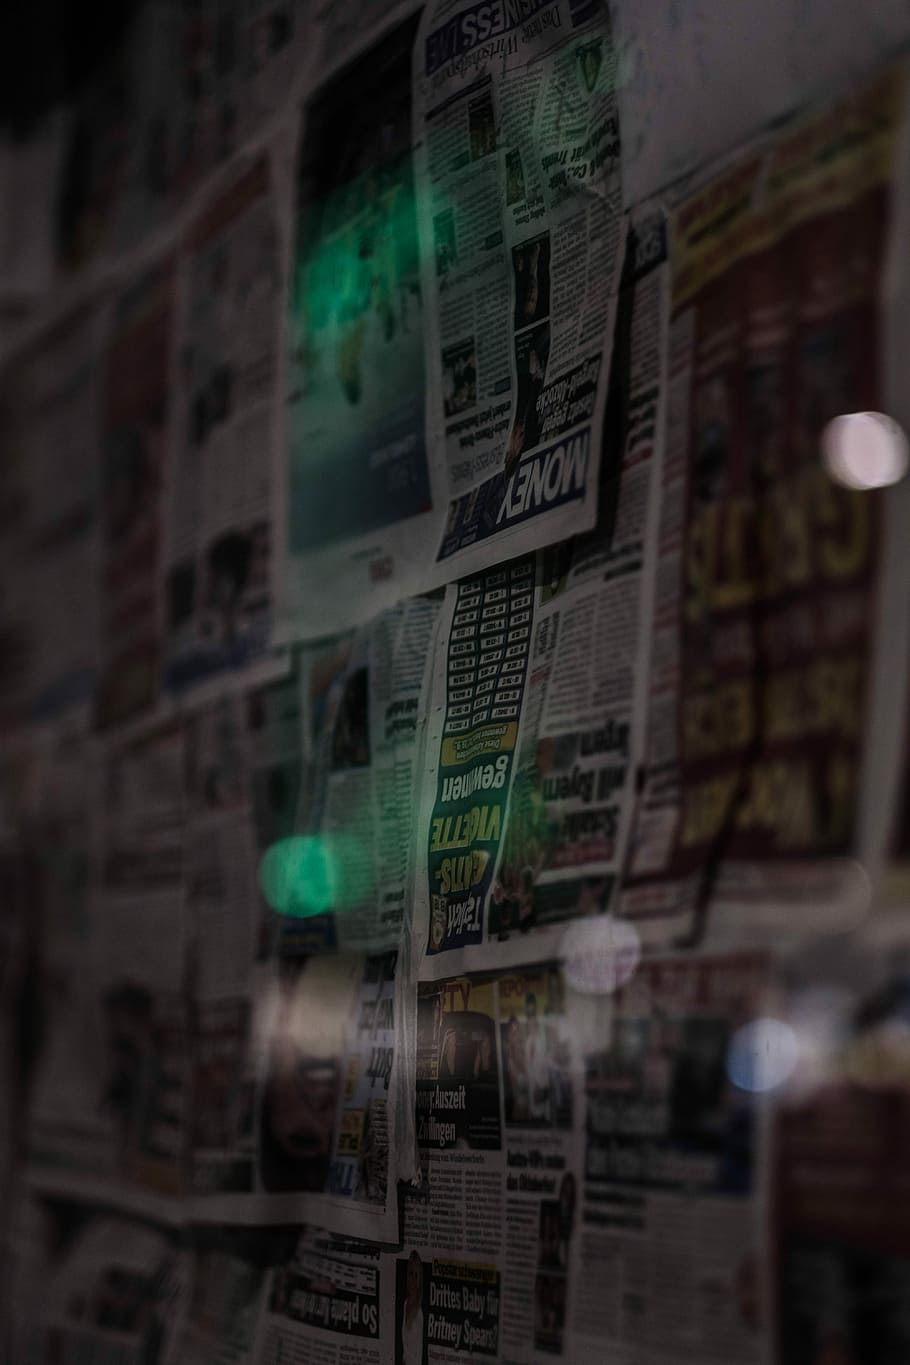 news paper article, newspaper sheets on wall, light, moody, dark